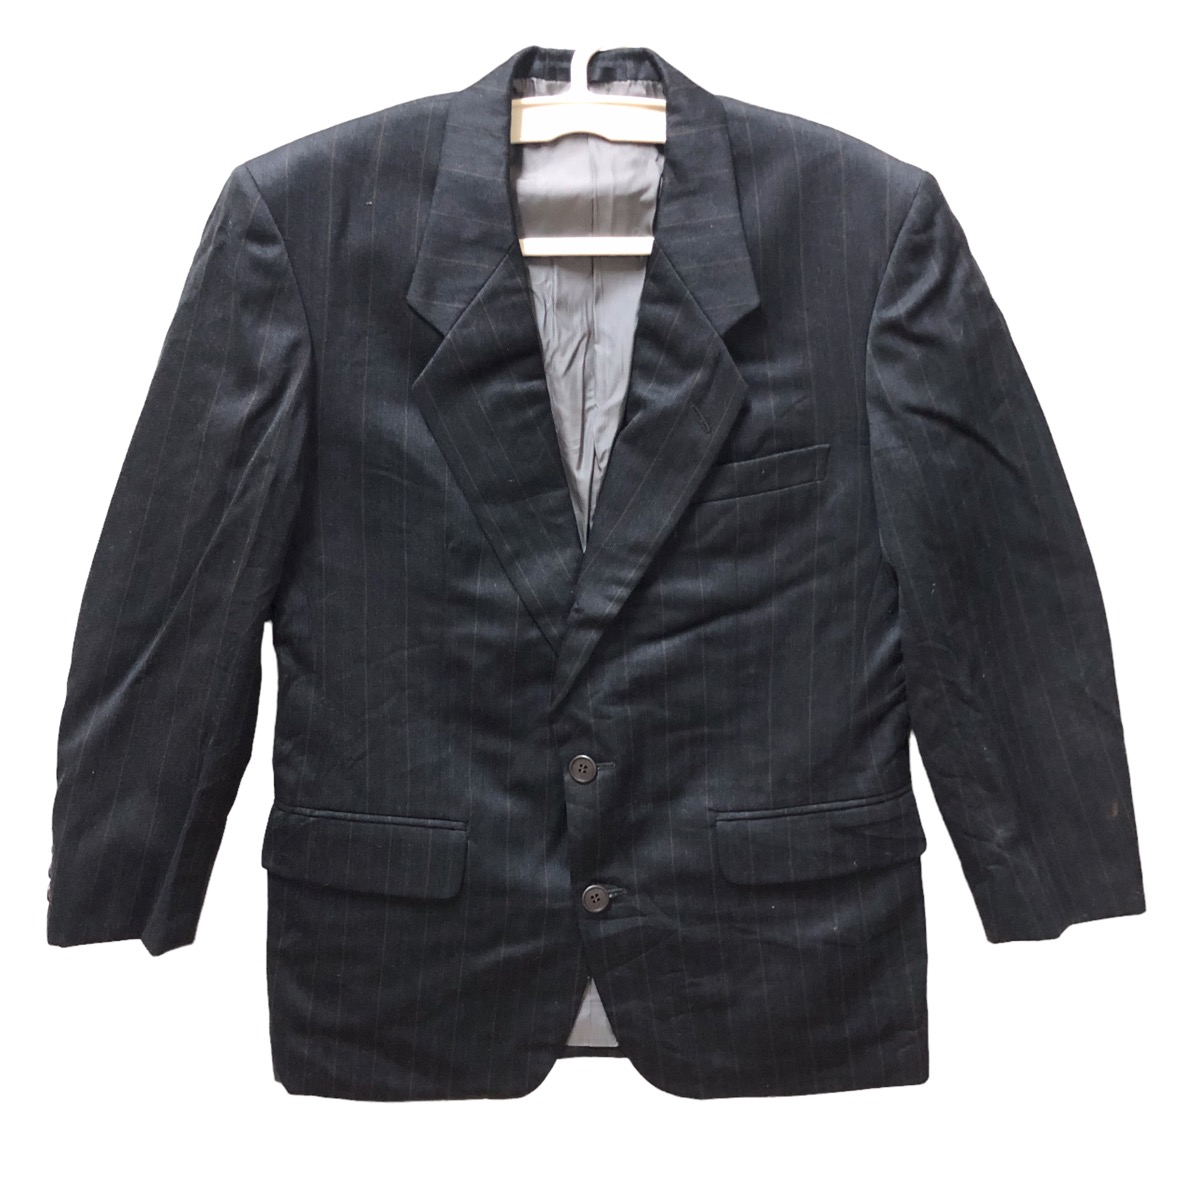 Christian Dior Monsieur - Christian dior monsieur wool classic suit black striped - 2